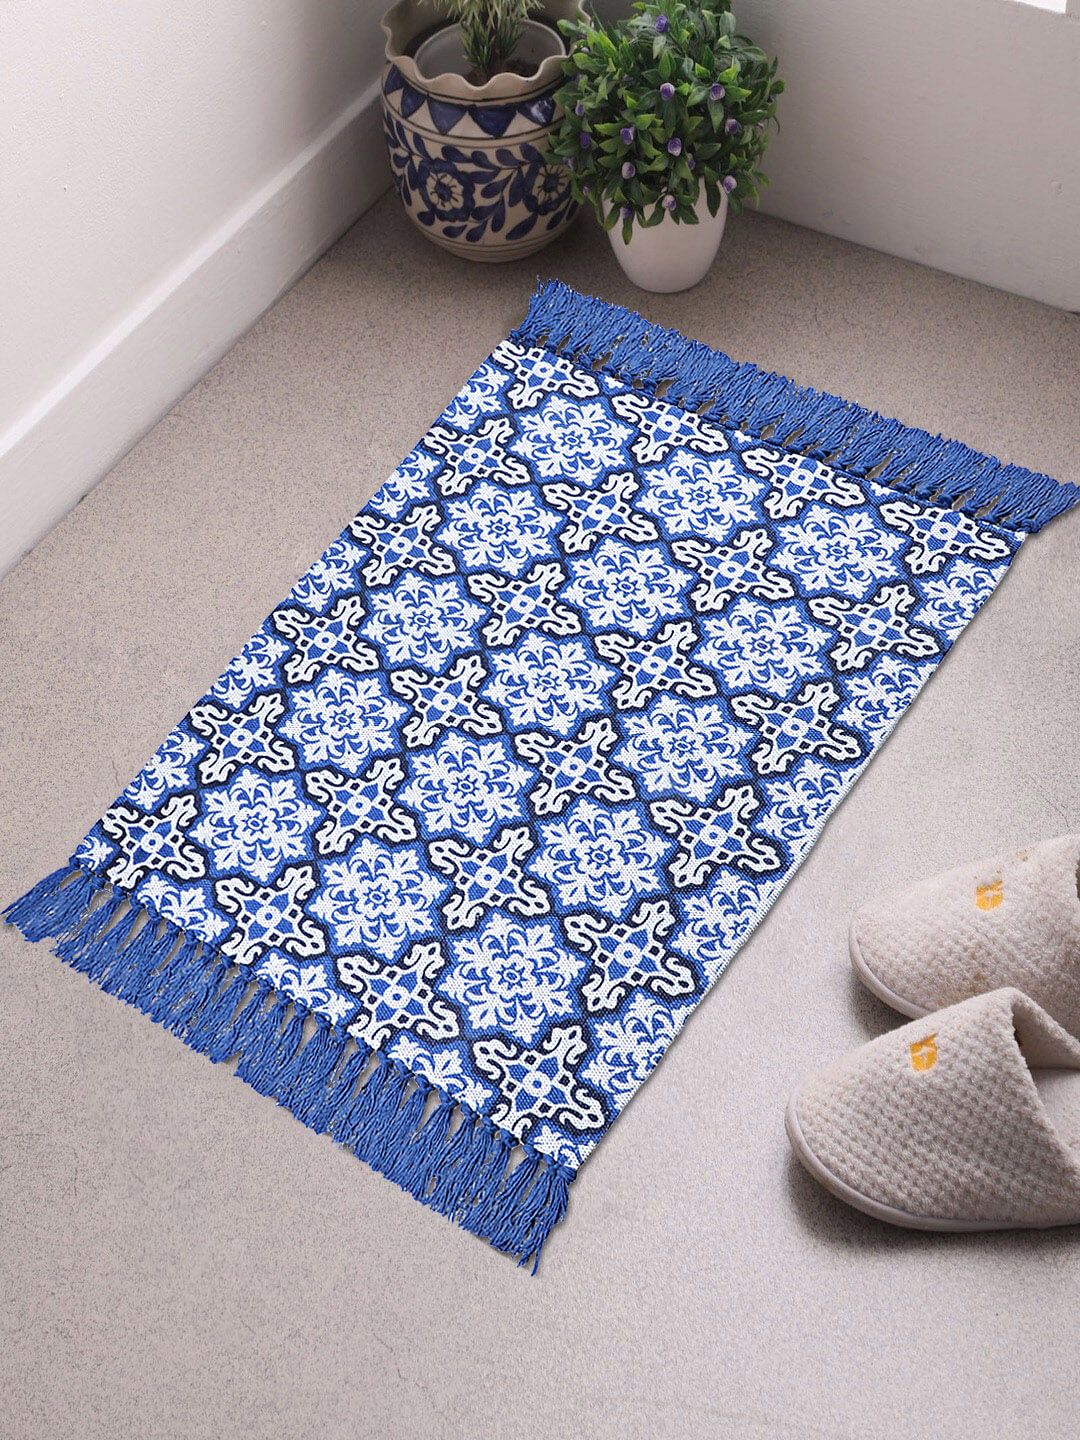 Saral Home Set Of 2 Blue & White Printed Cotton Floor Mats Price in India